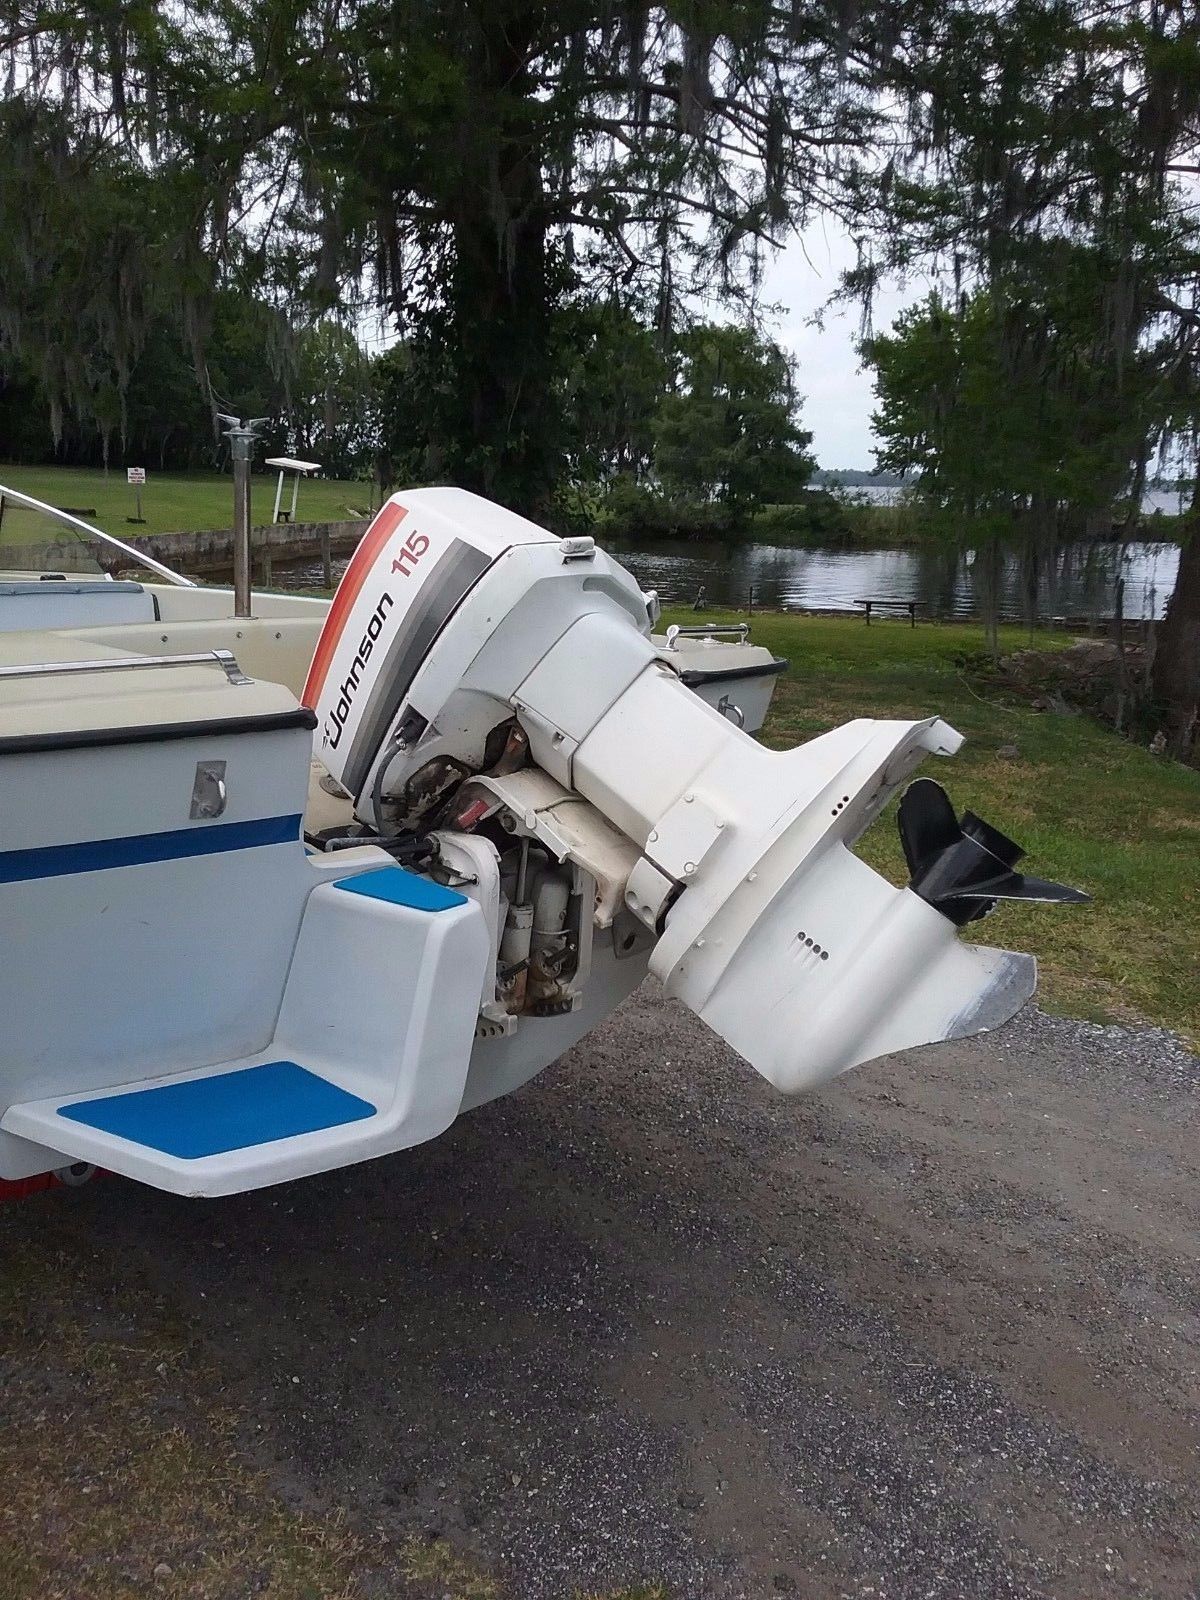 Switzer Craft Ski Boat 1983 For Sale For 100 Boats From 0059